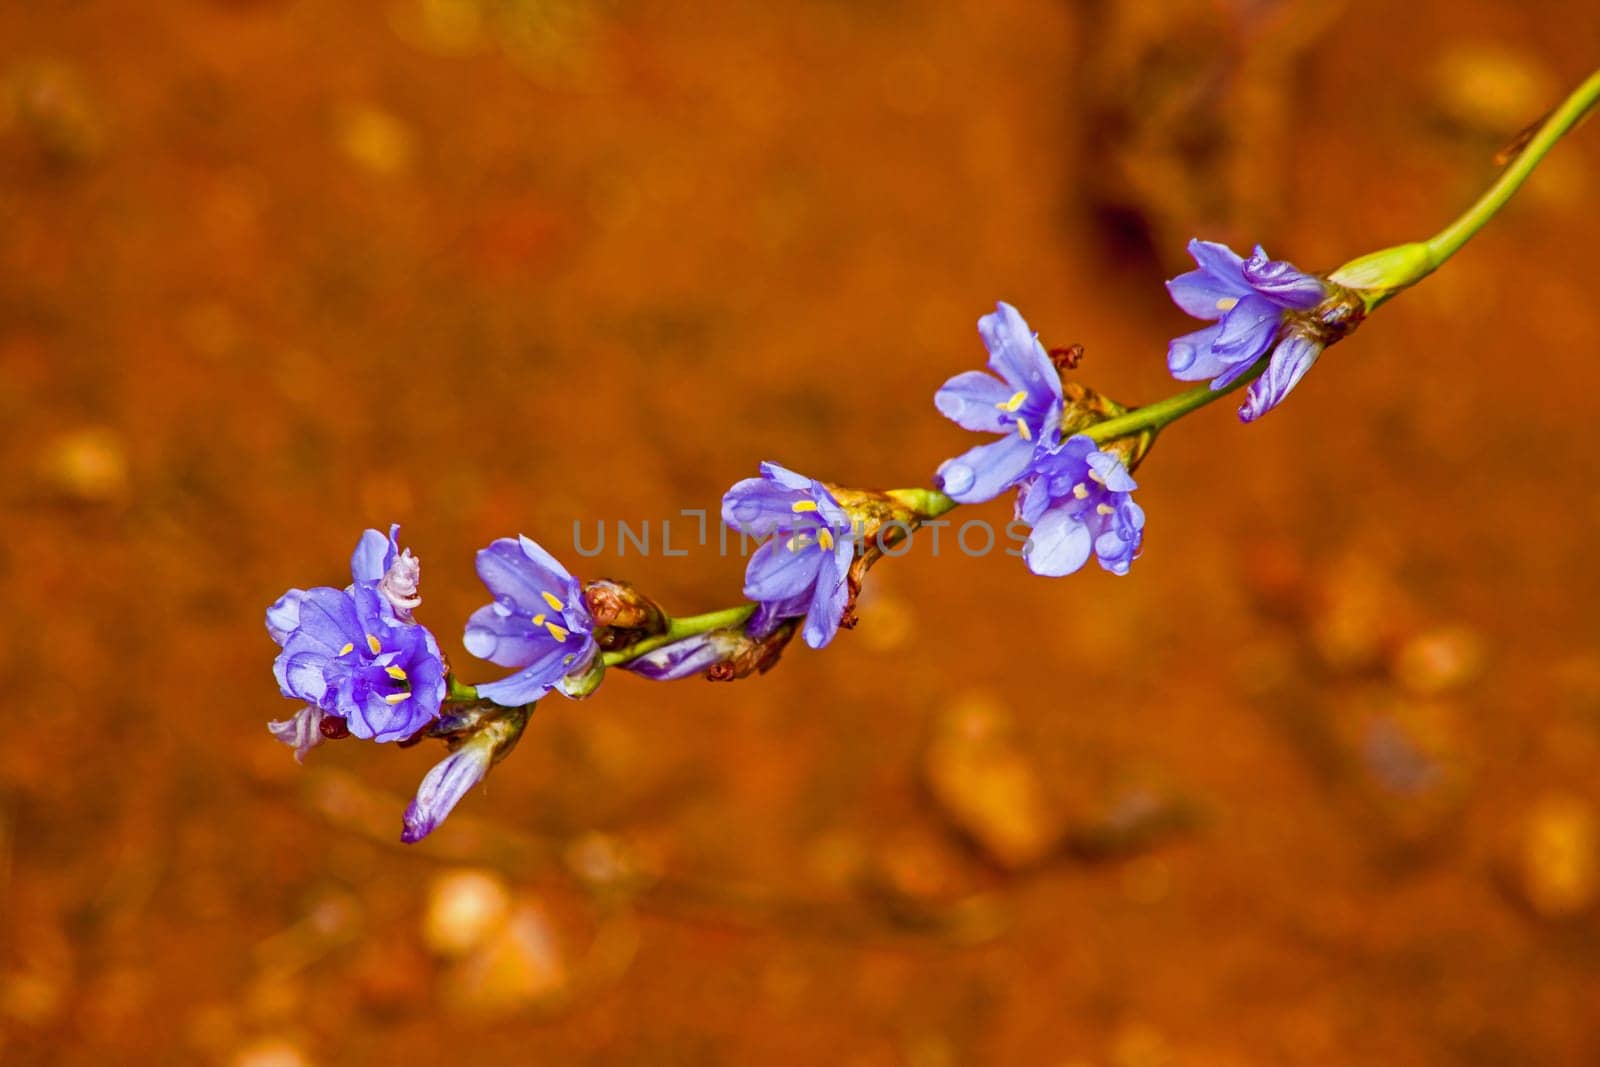 Bright blue Aristea flowers on a blurred background